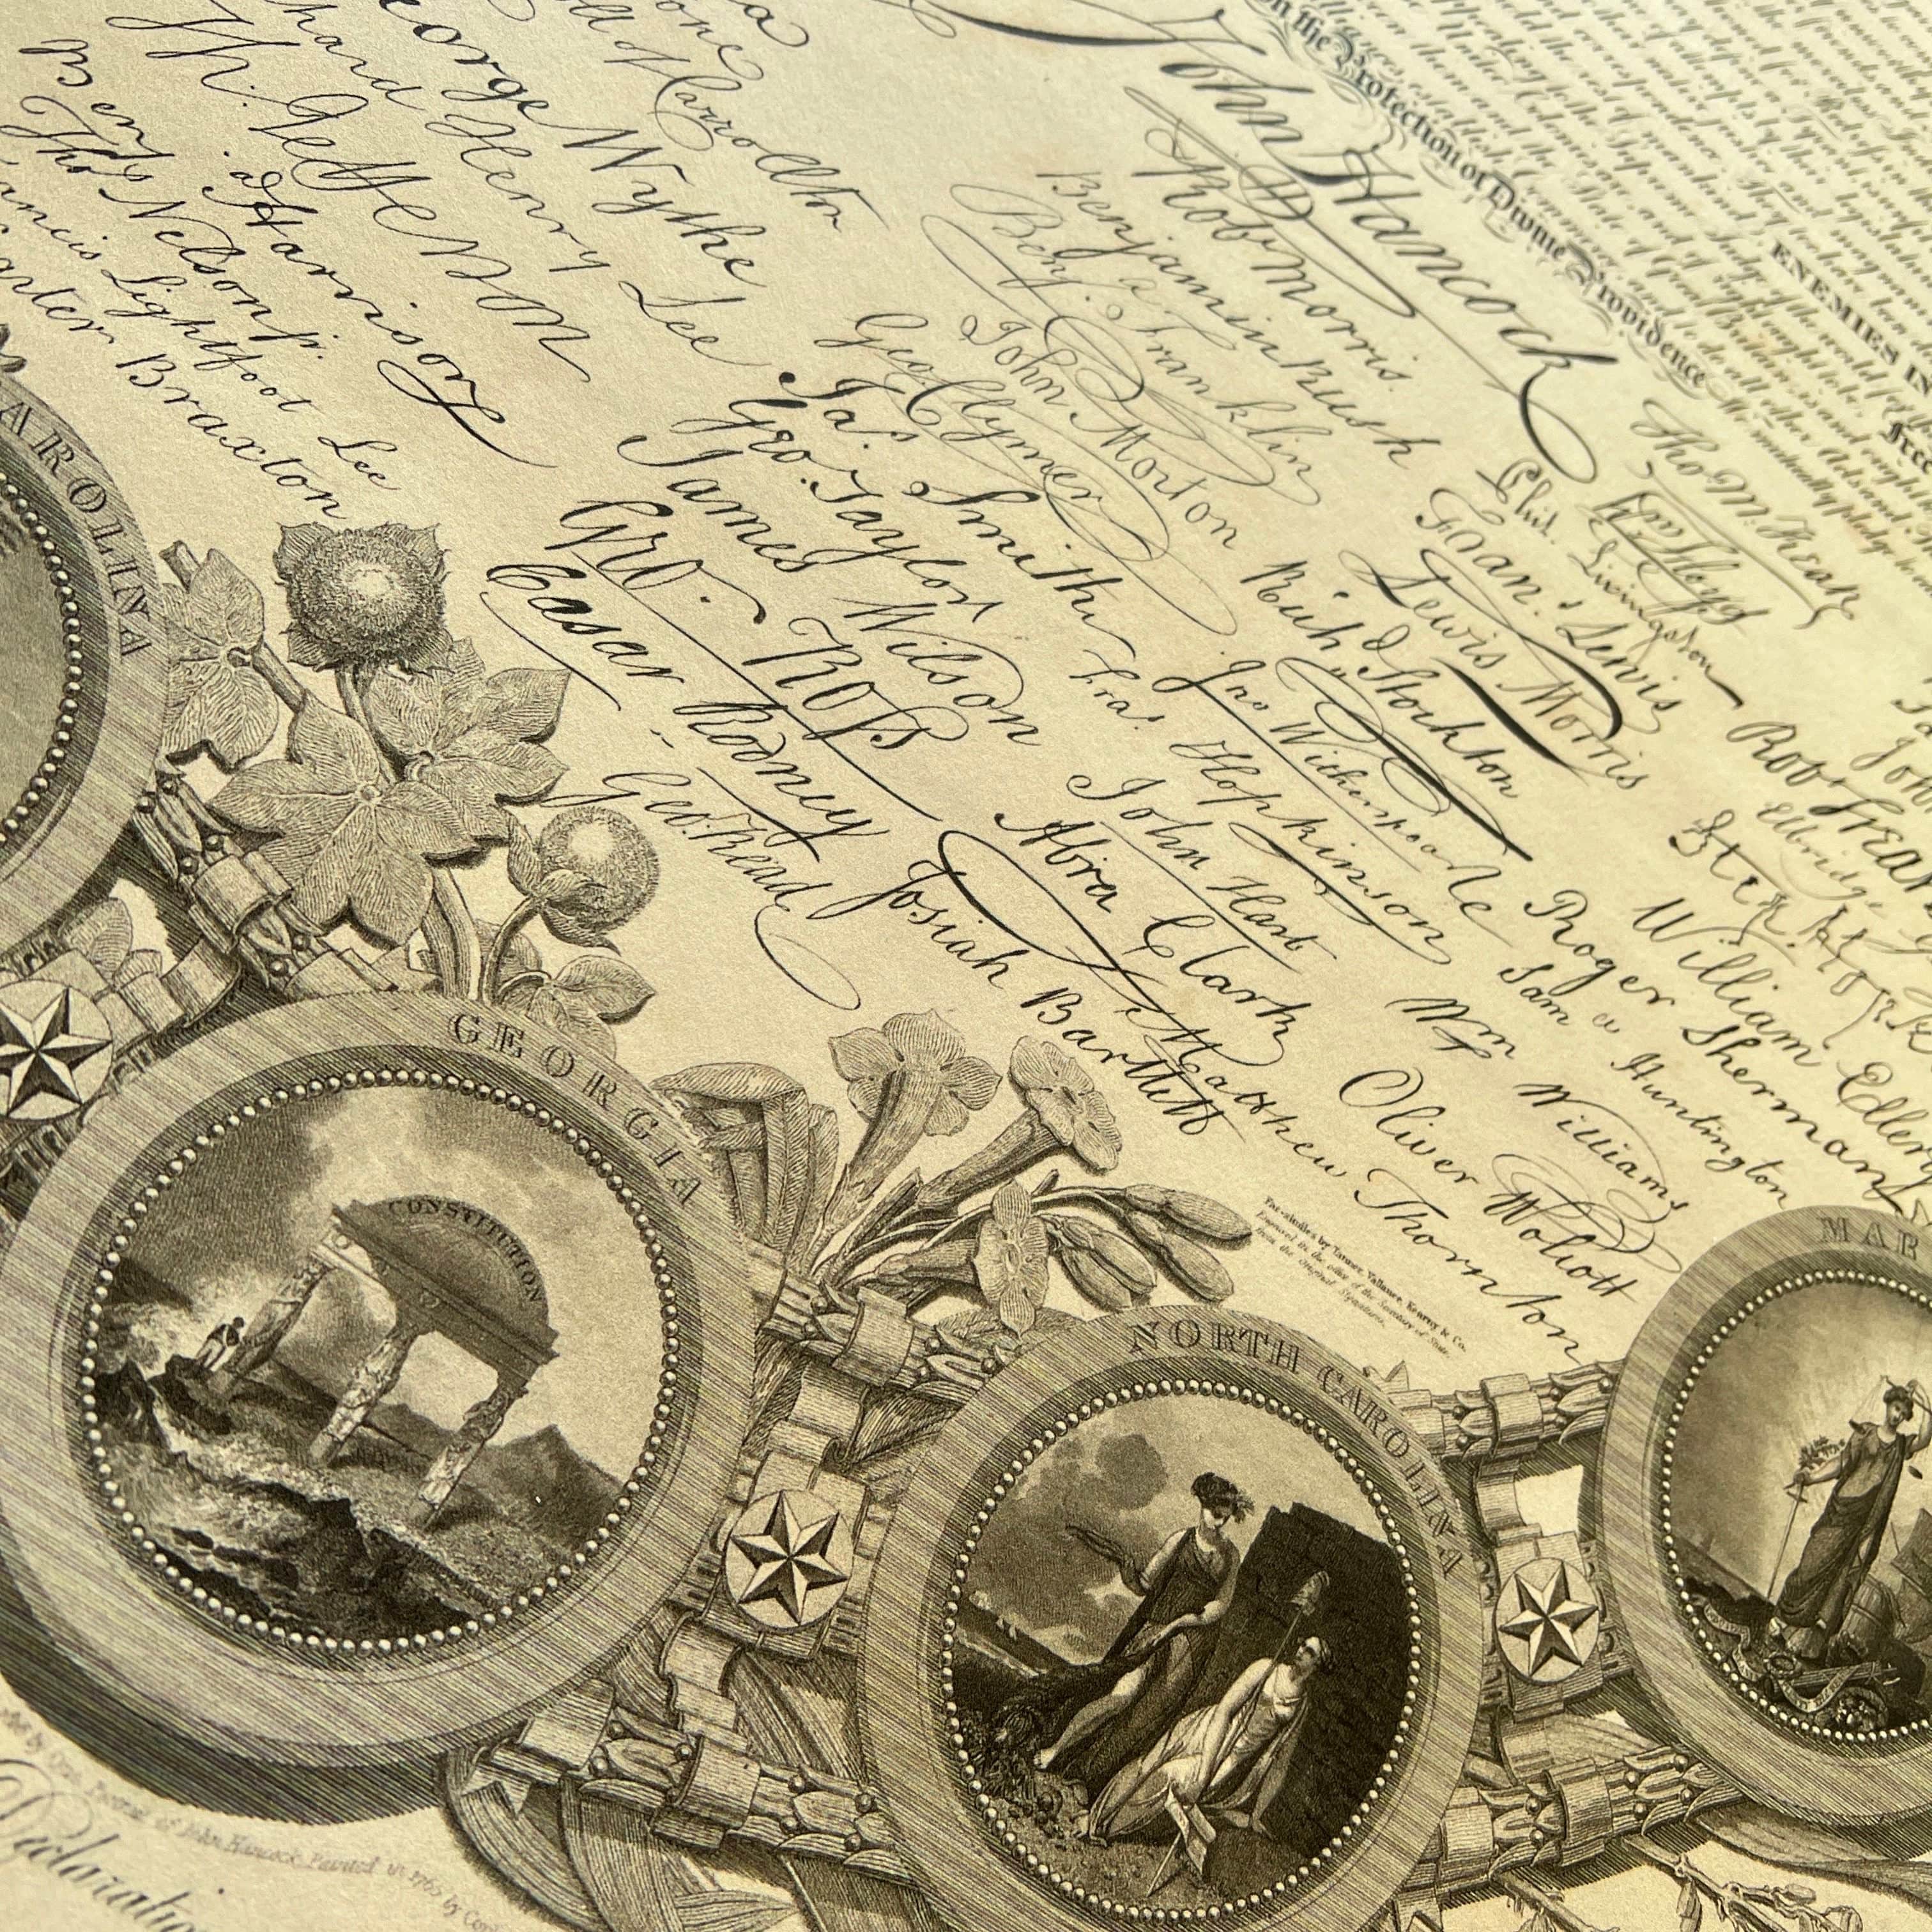 Close-up of signatures from Historic 